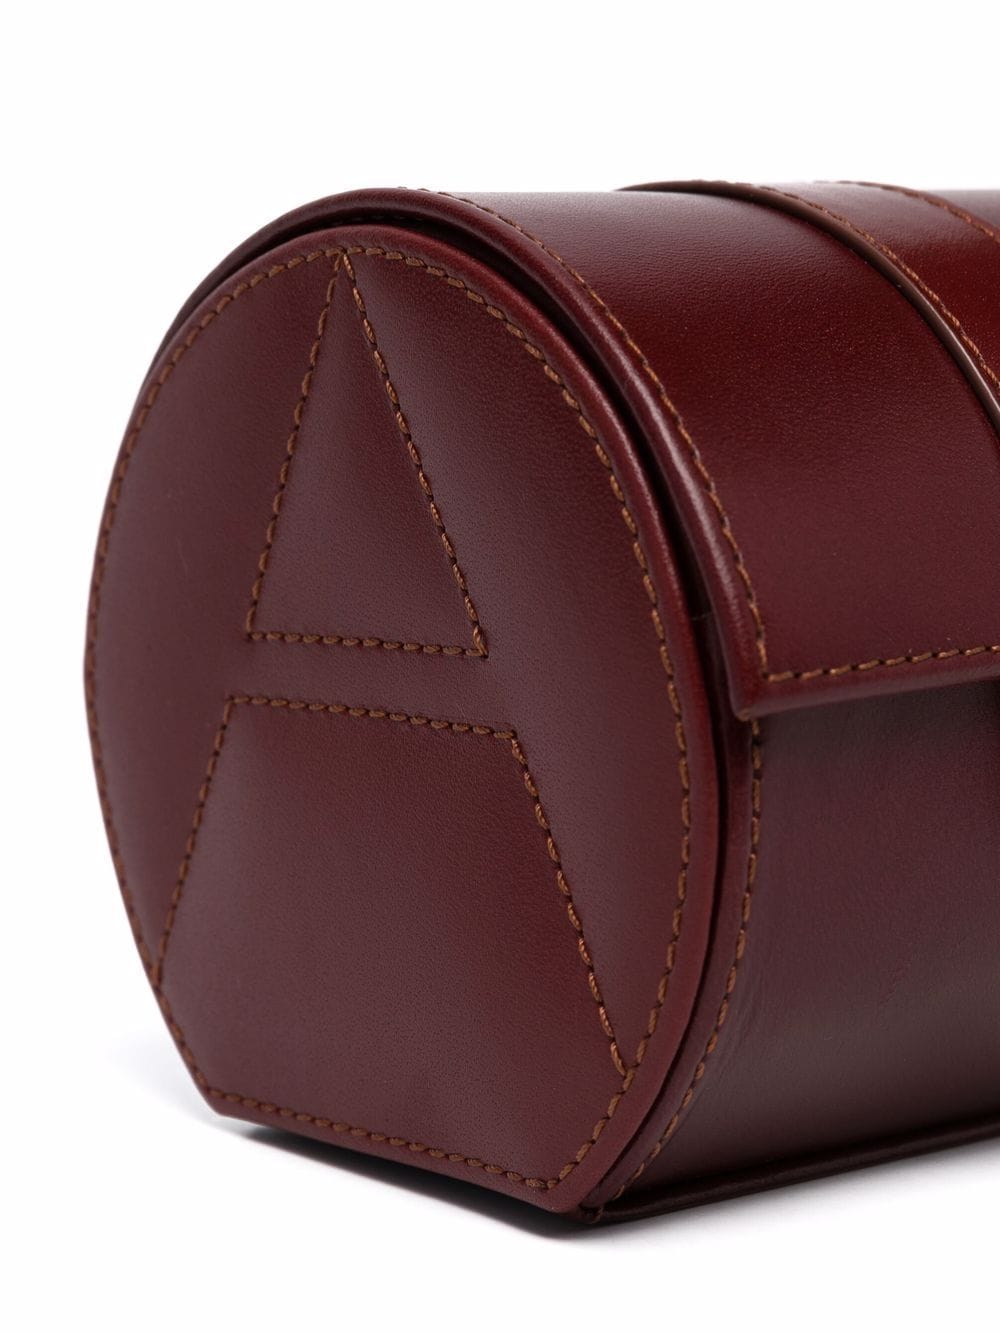 aspinal of london stitched logo watch case - brown